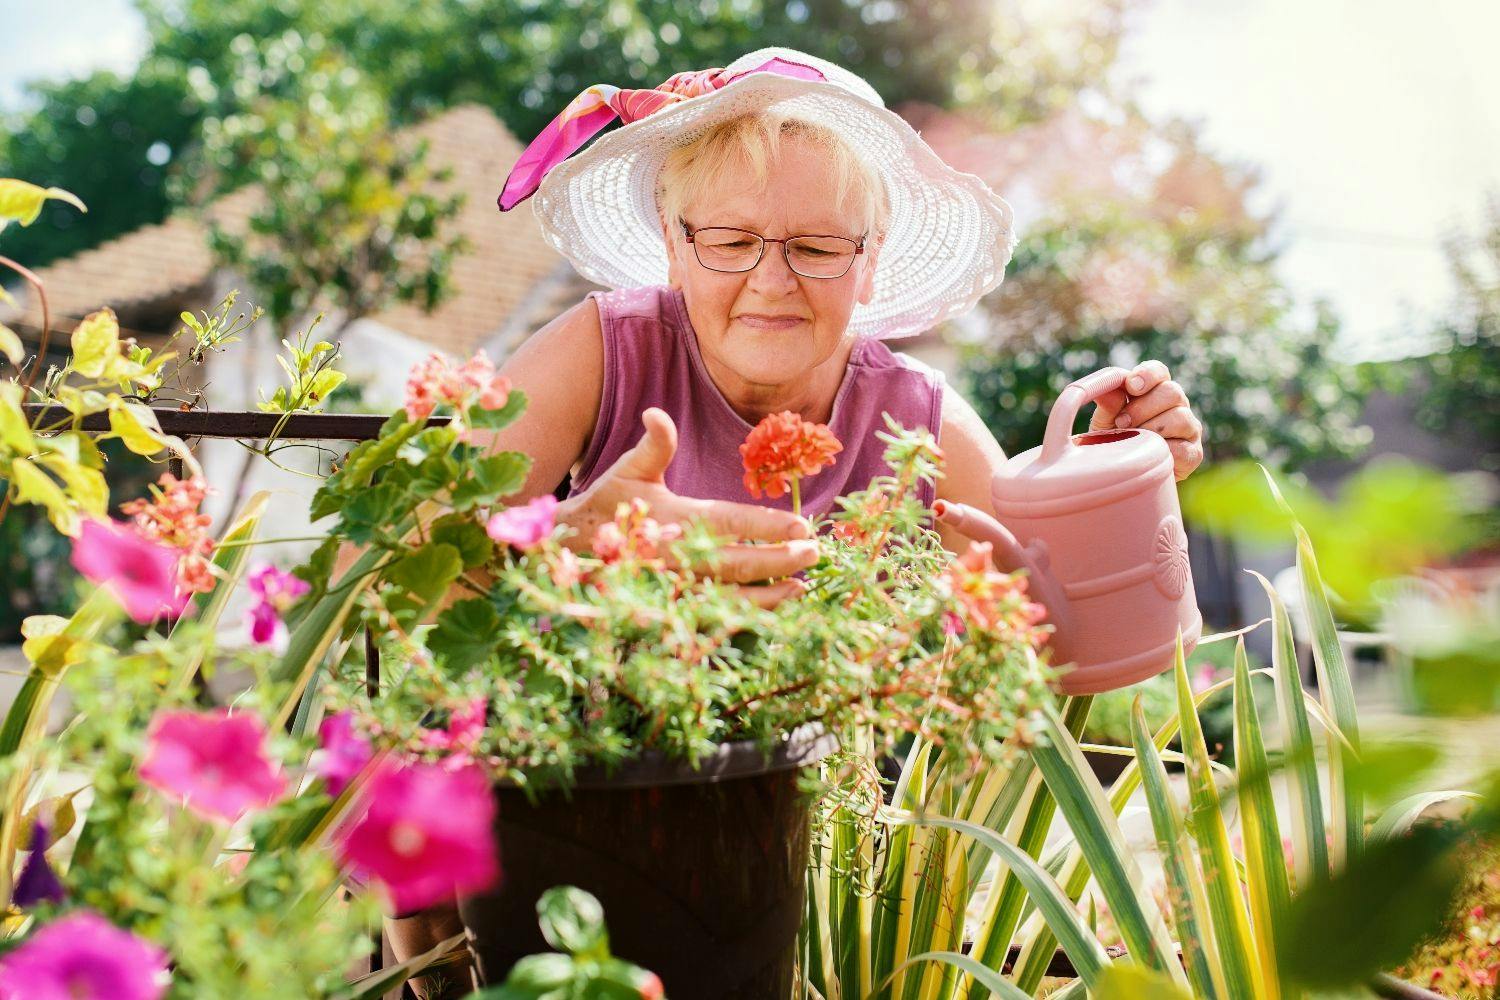 Woman wearing a pink top and hat gardening with a watering can